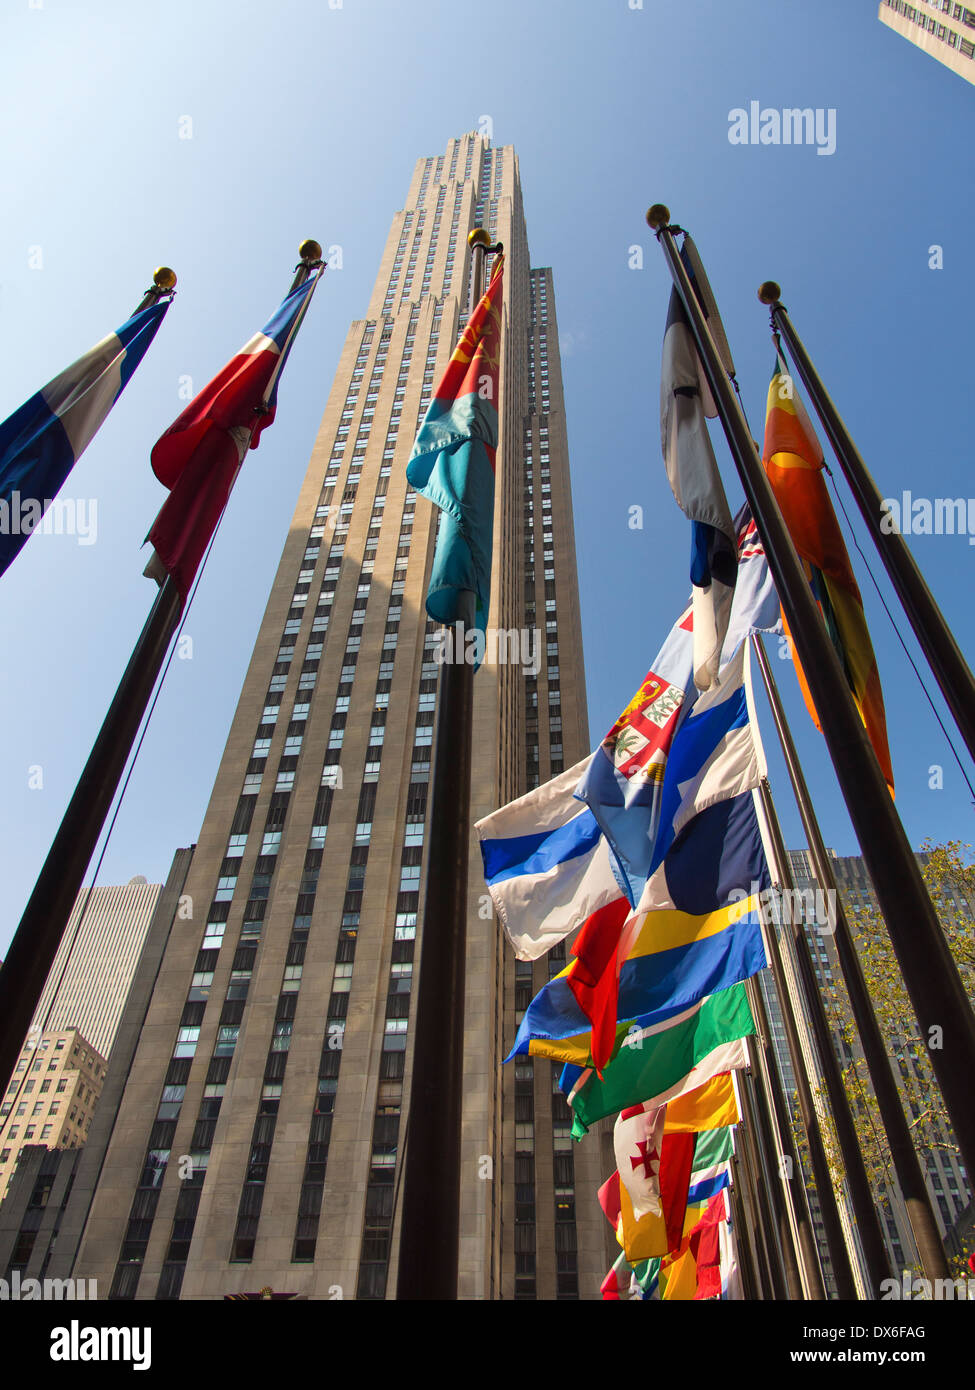 Flags fluttering at the Rockefeller Centre, New York USA Stock Photo